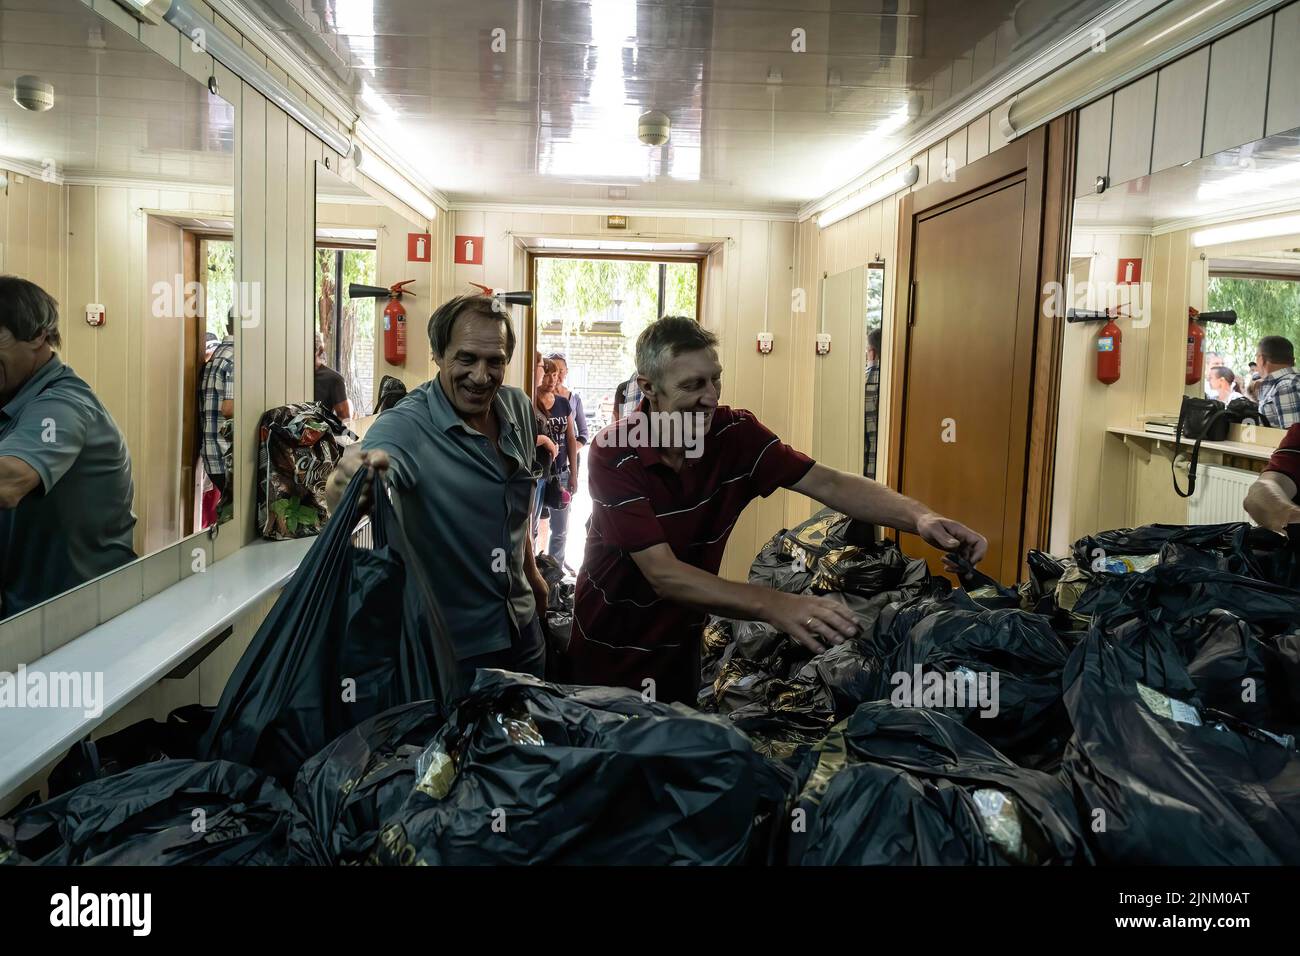 Two volunteers can be seen distributing humanitarian aid after a Sunday service in a Catholics church in Slovyansk, Donbas. Despite the city being continuously heavily bombarded by Russian artilleries and missiles, some residents still plan to stay in the city of Slovyansk which had a population of 106,972 (2021 est.), now stands as a main strategic city in the Donetsk region of Donbas. Since the war started, over 80% of the civilian have been evacuated from the war. Stock Photo